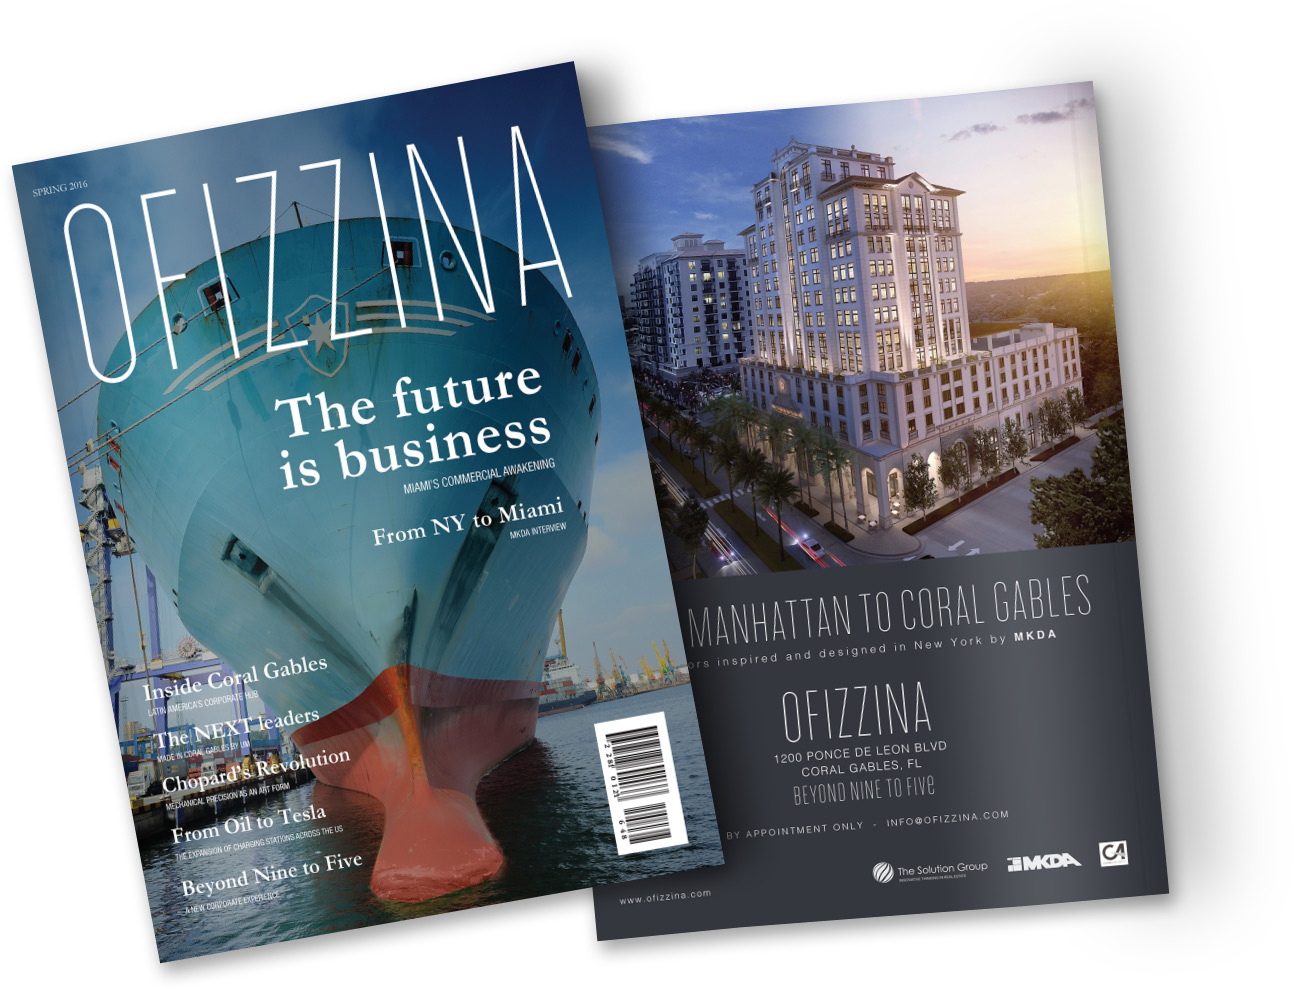 Ofizzina. TSG Group. Plvral Advertising and Marketing, Miami.